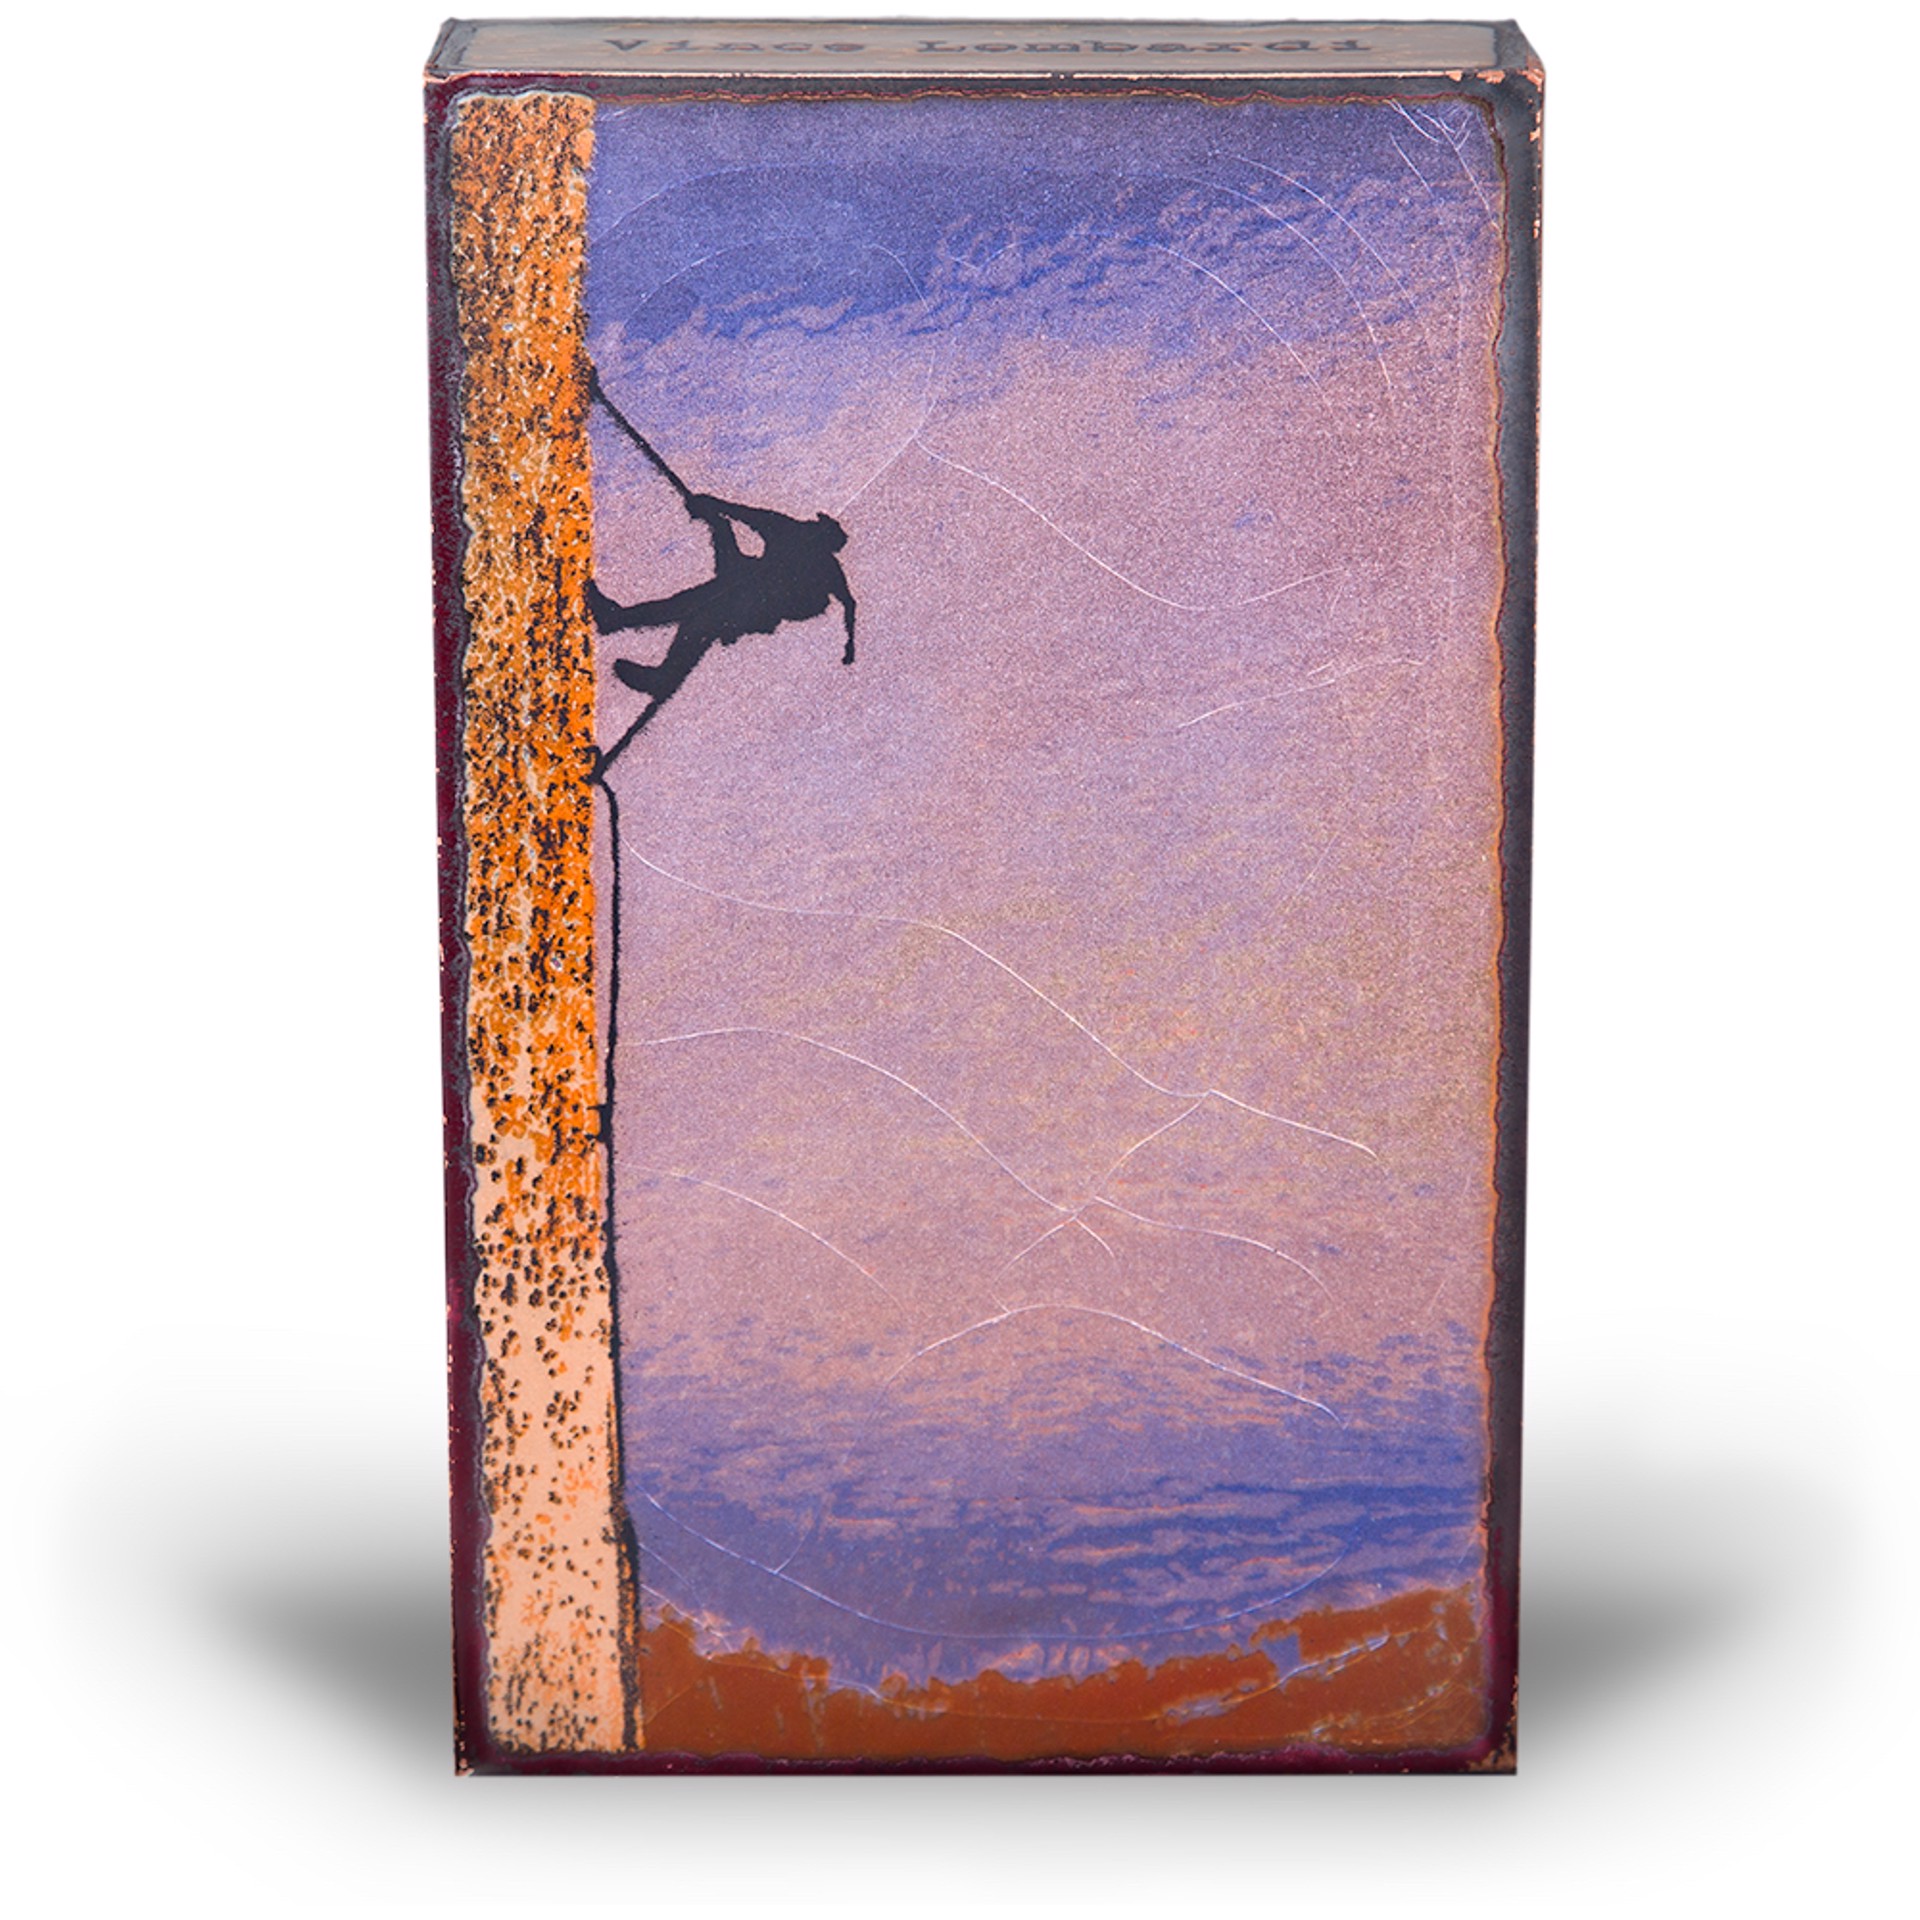 A Houston Llew Glass Fired To Copper Spiritile #235 Featuring A Mountain Climber And A Quote By Vince Lombardi, Available At Gallery Wild